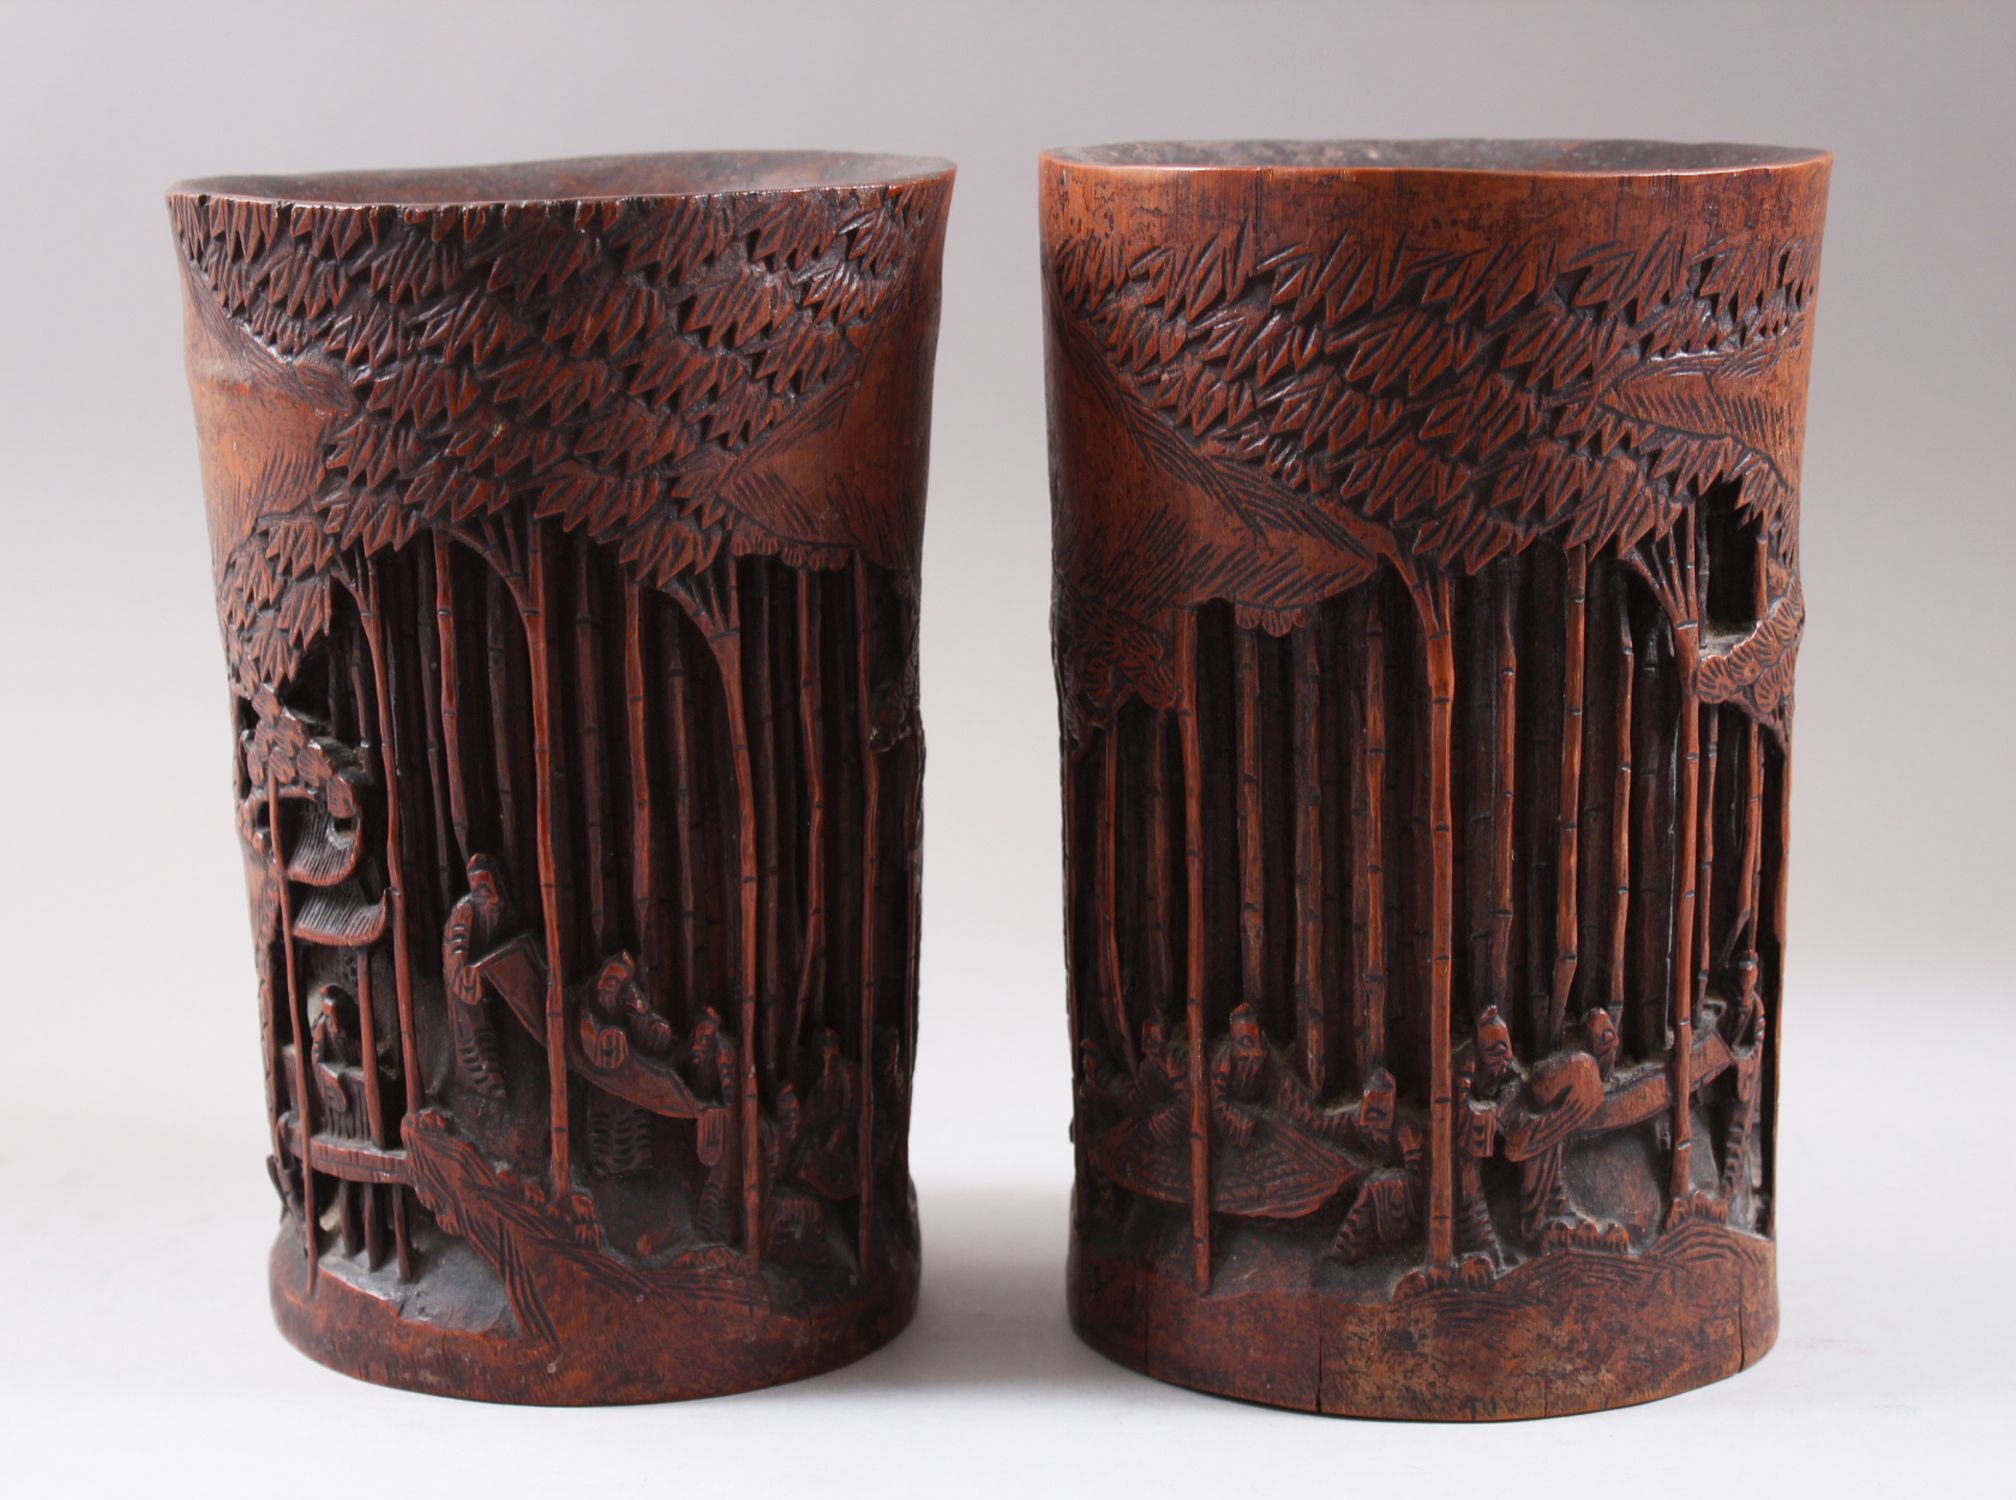 A PAIR OF CHINESE 19TH CENTURY BAMBOO CARVED BRUSH POTS, carved deeply to depict scenes of figures